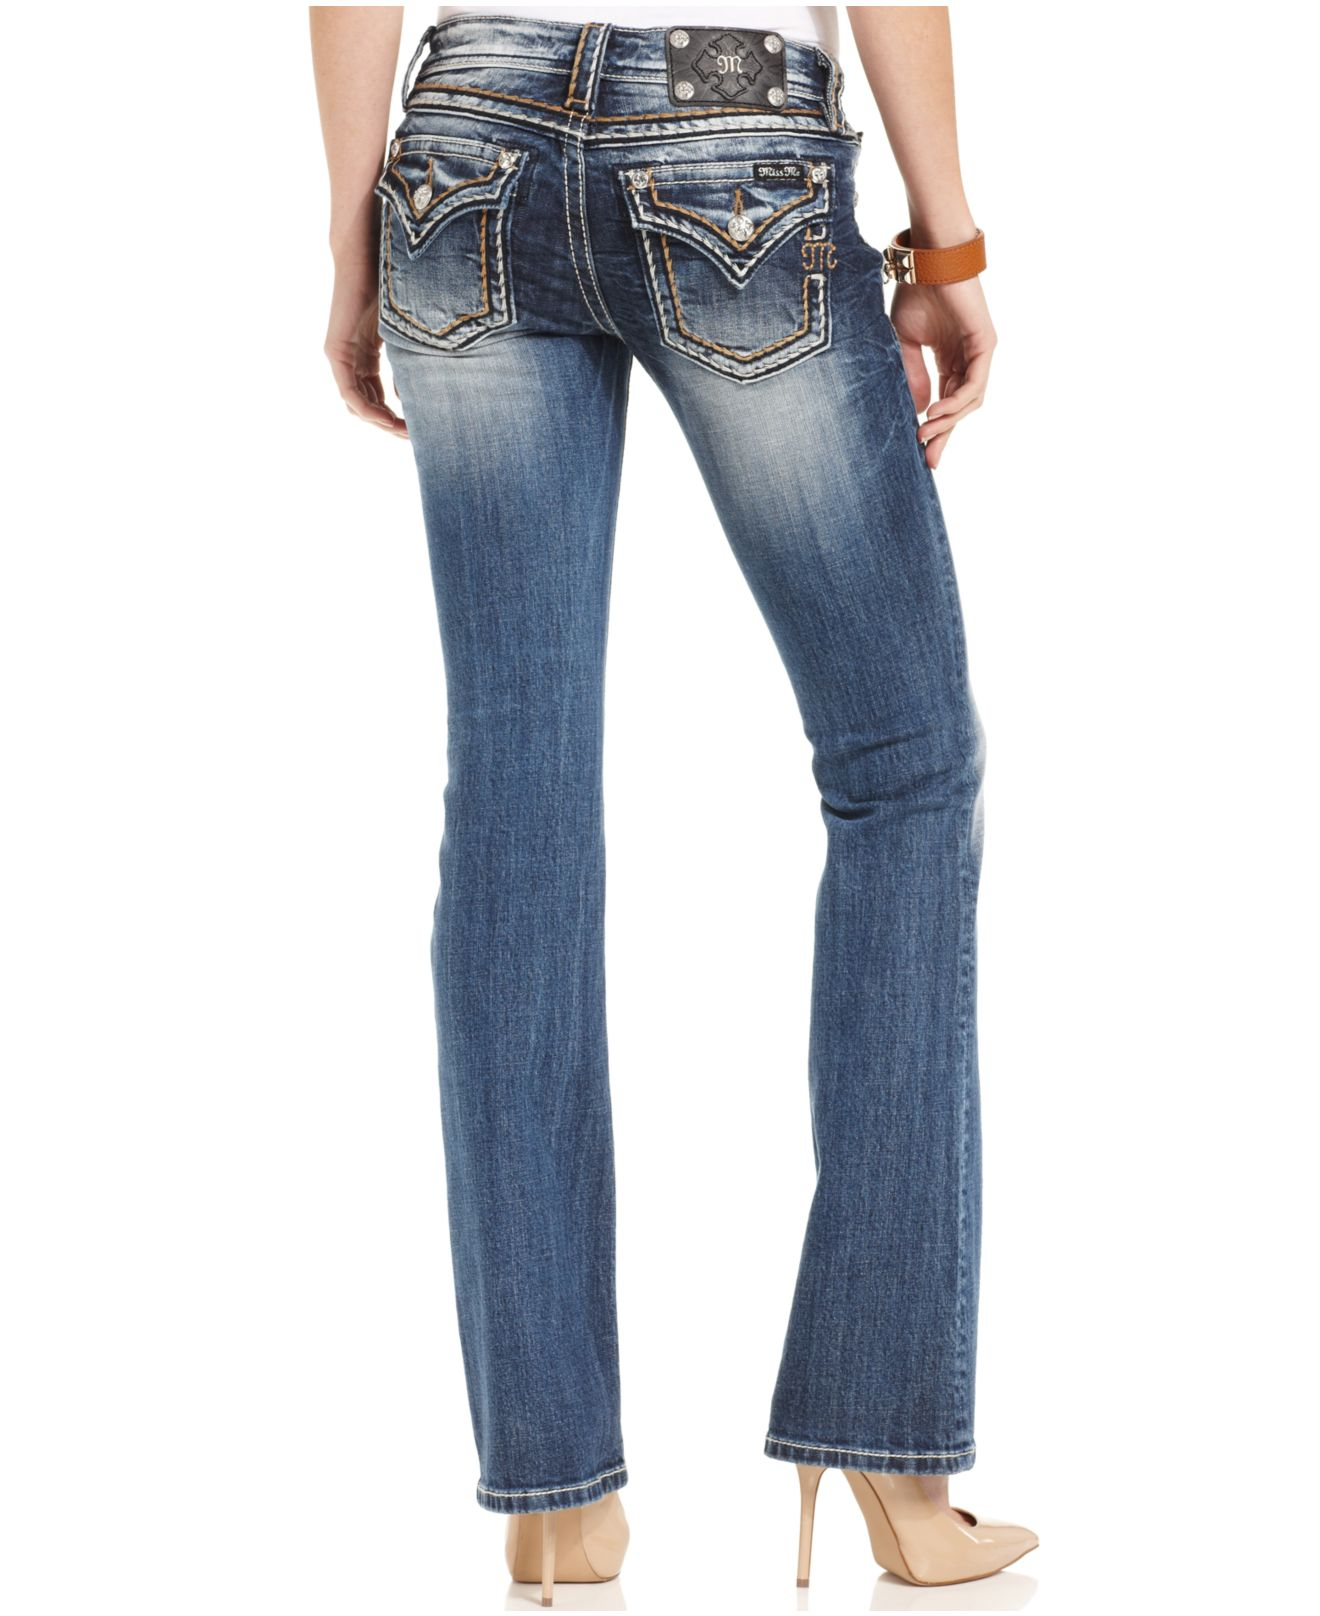 Miss me Embellished Bootcut Jeans in Blue (Medium Wash) | Lyst